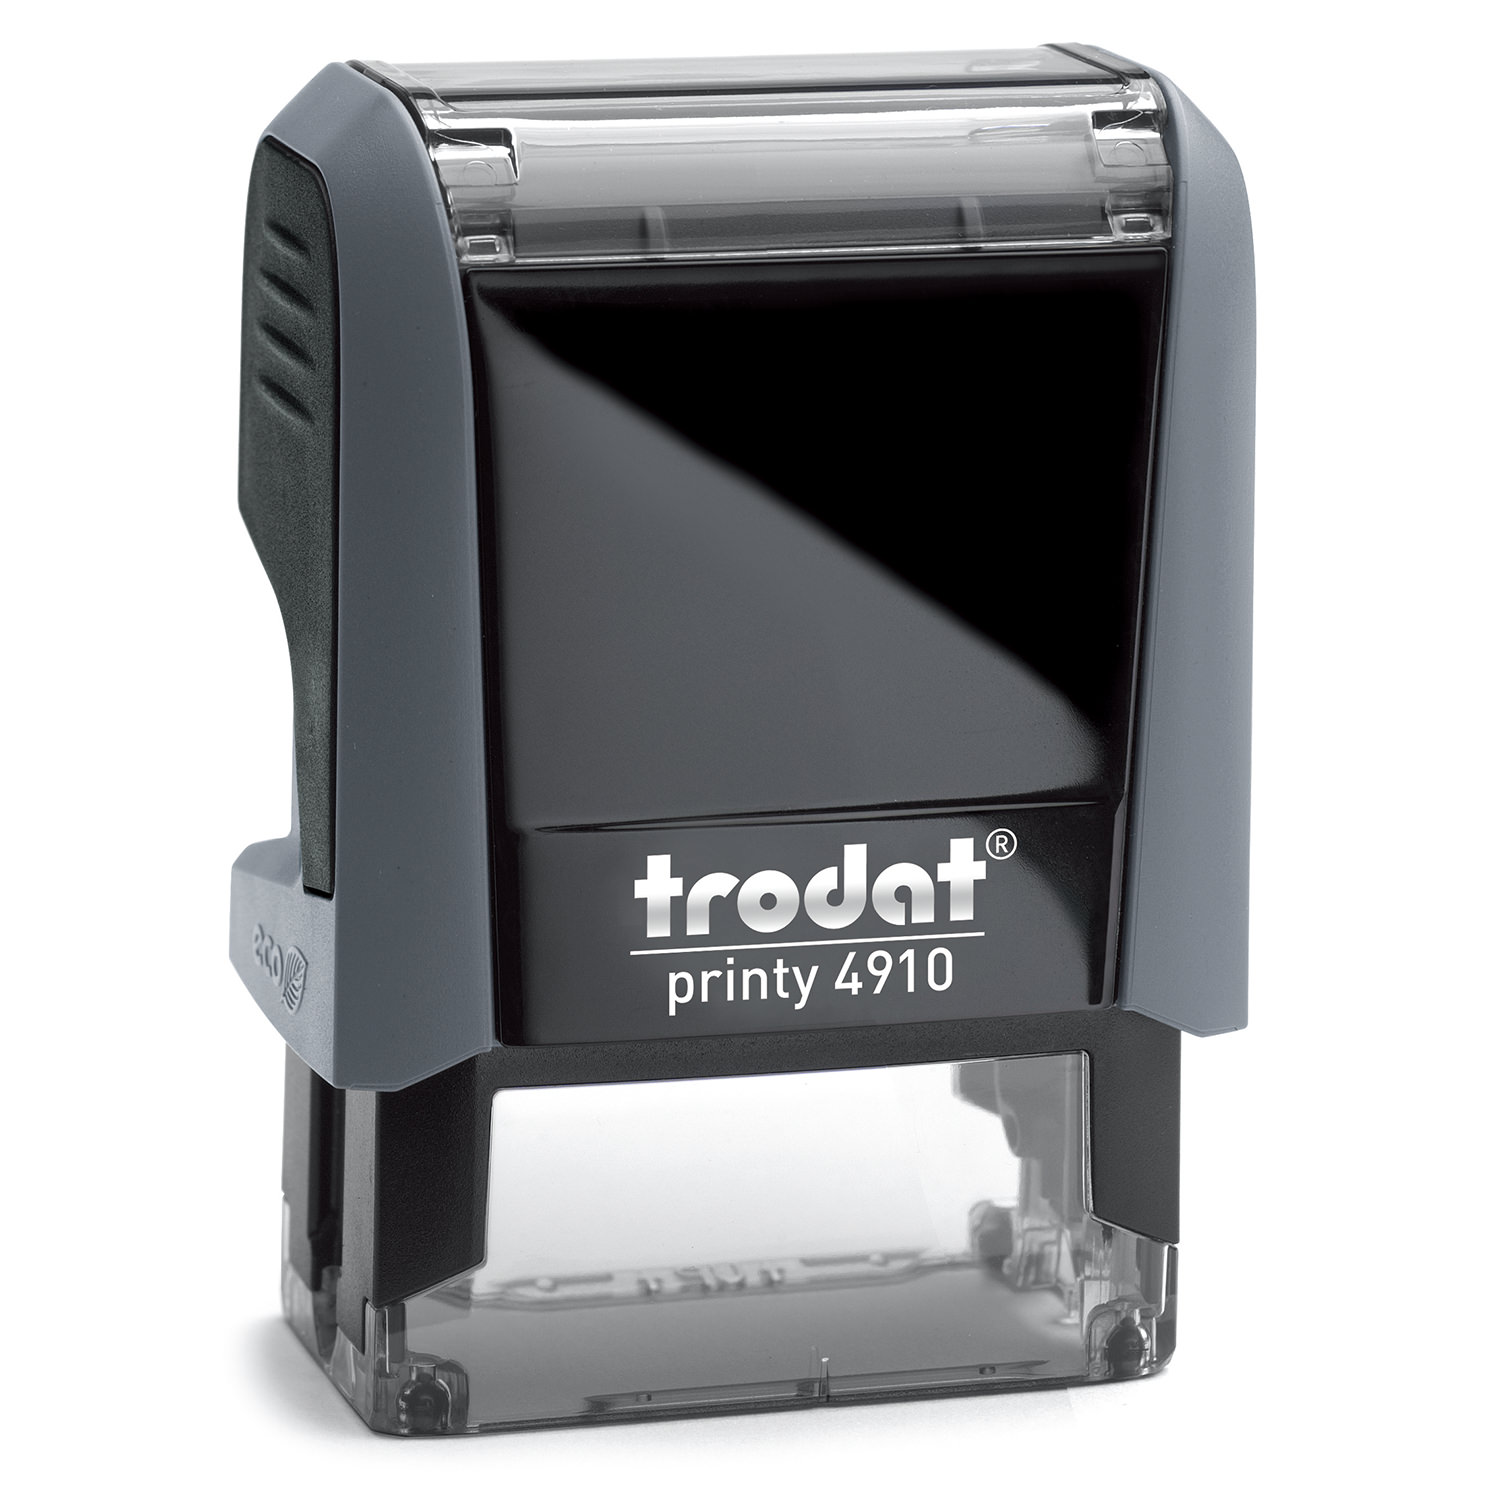 Customize and order your Trodat Printy 4910